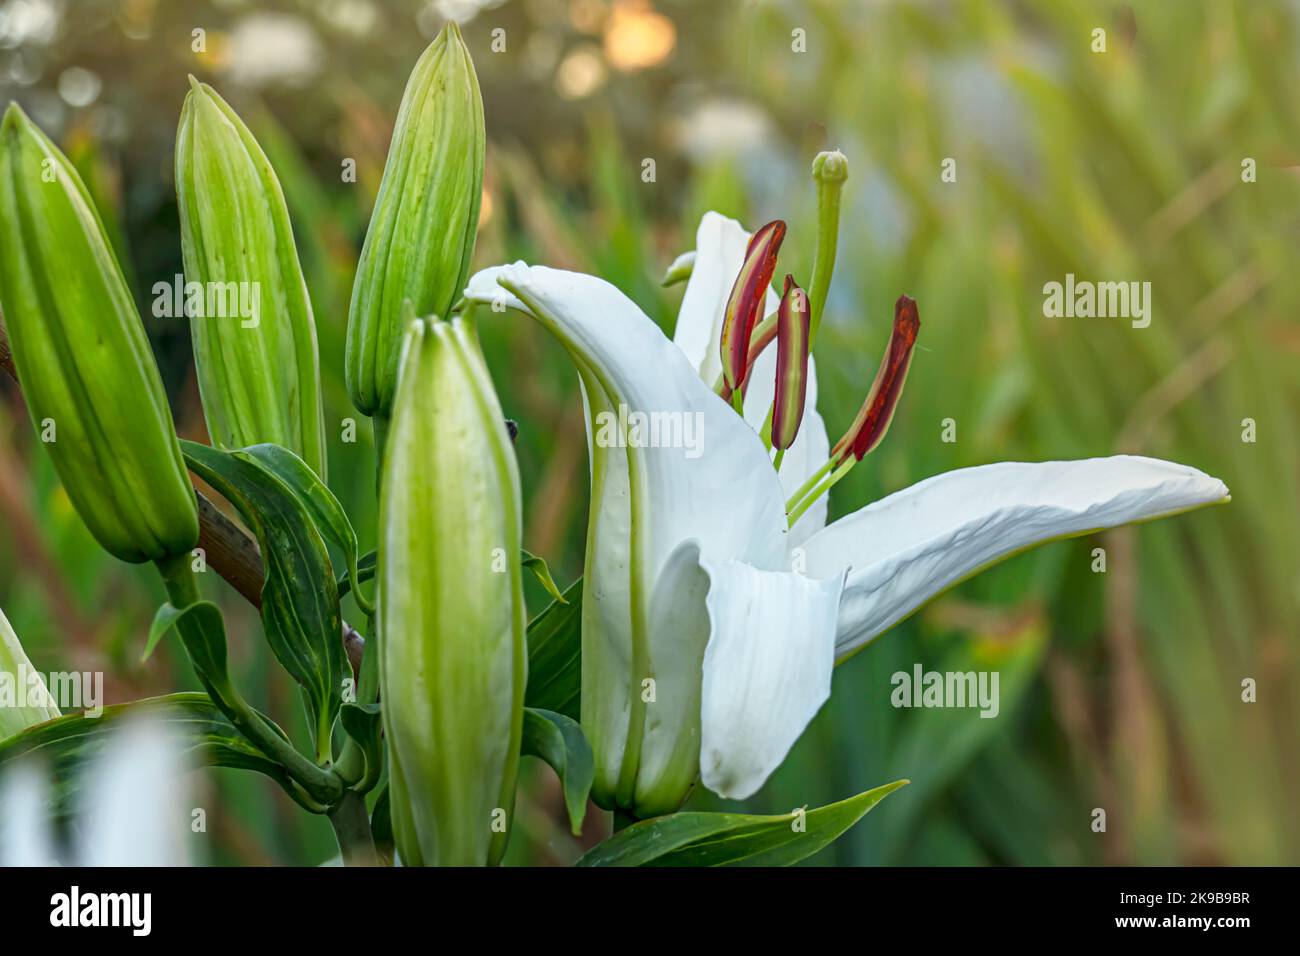 Blooming white lily with buds ready to bloom Stock Photo